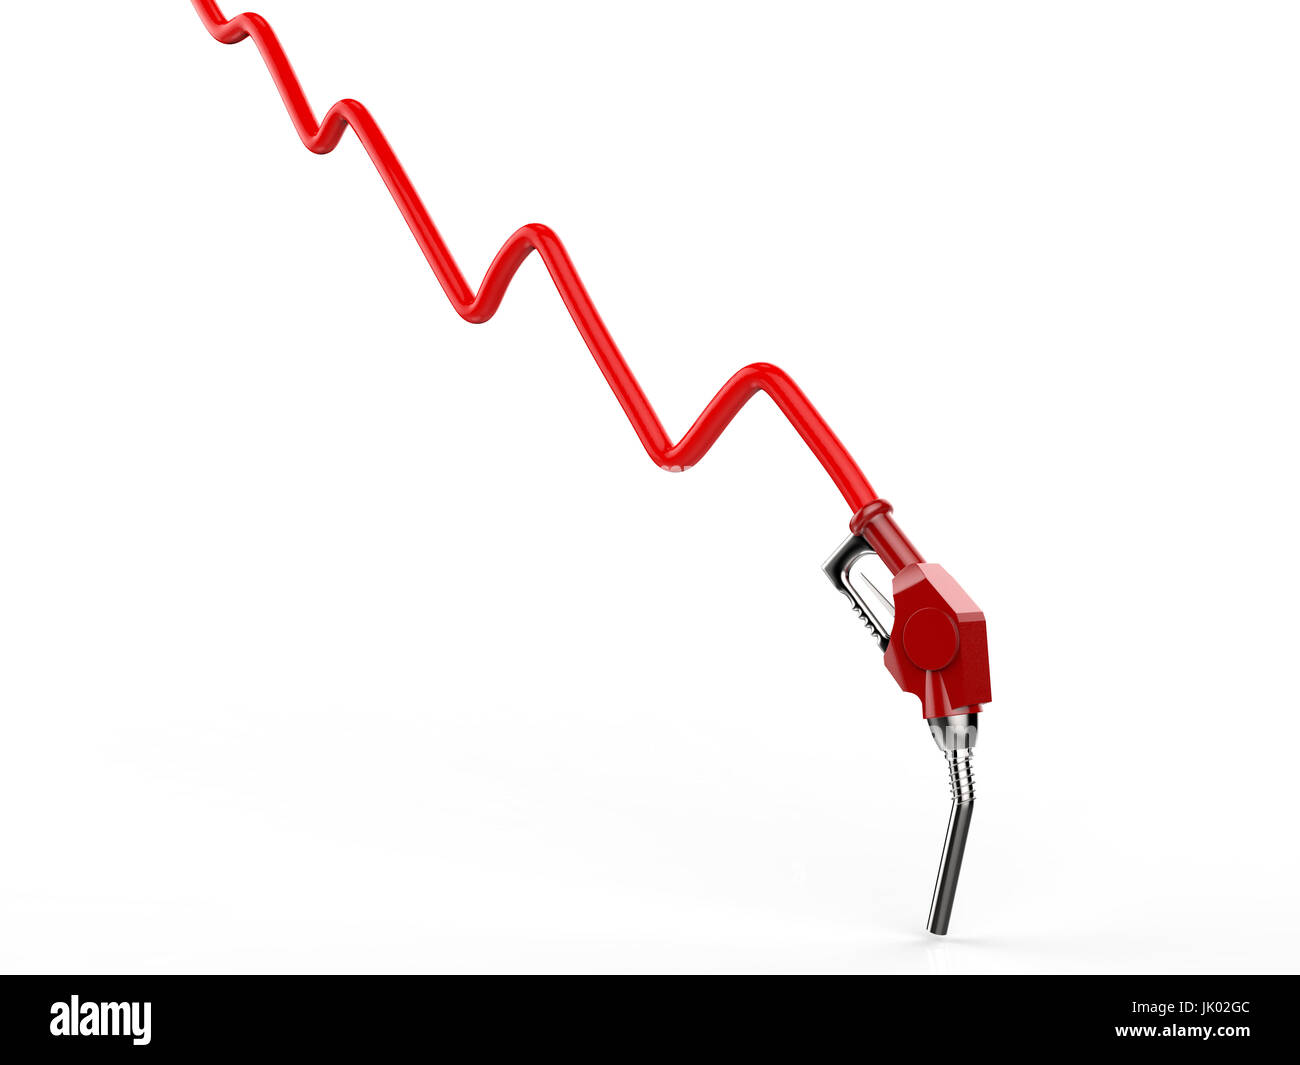 oil price falling concept with 3d rendering red graph and red nozzle Stock Photo